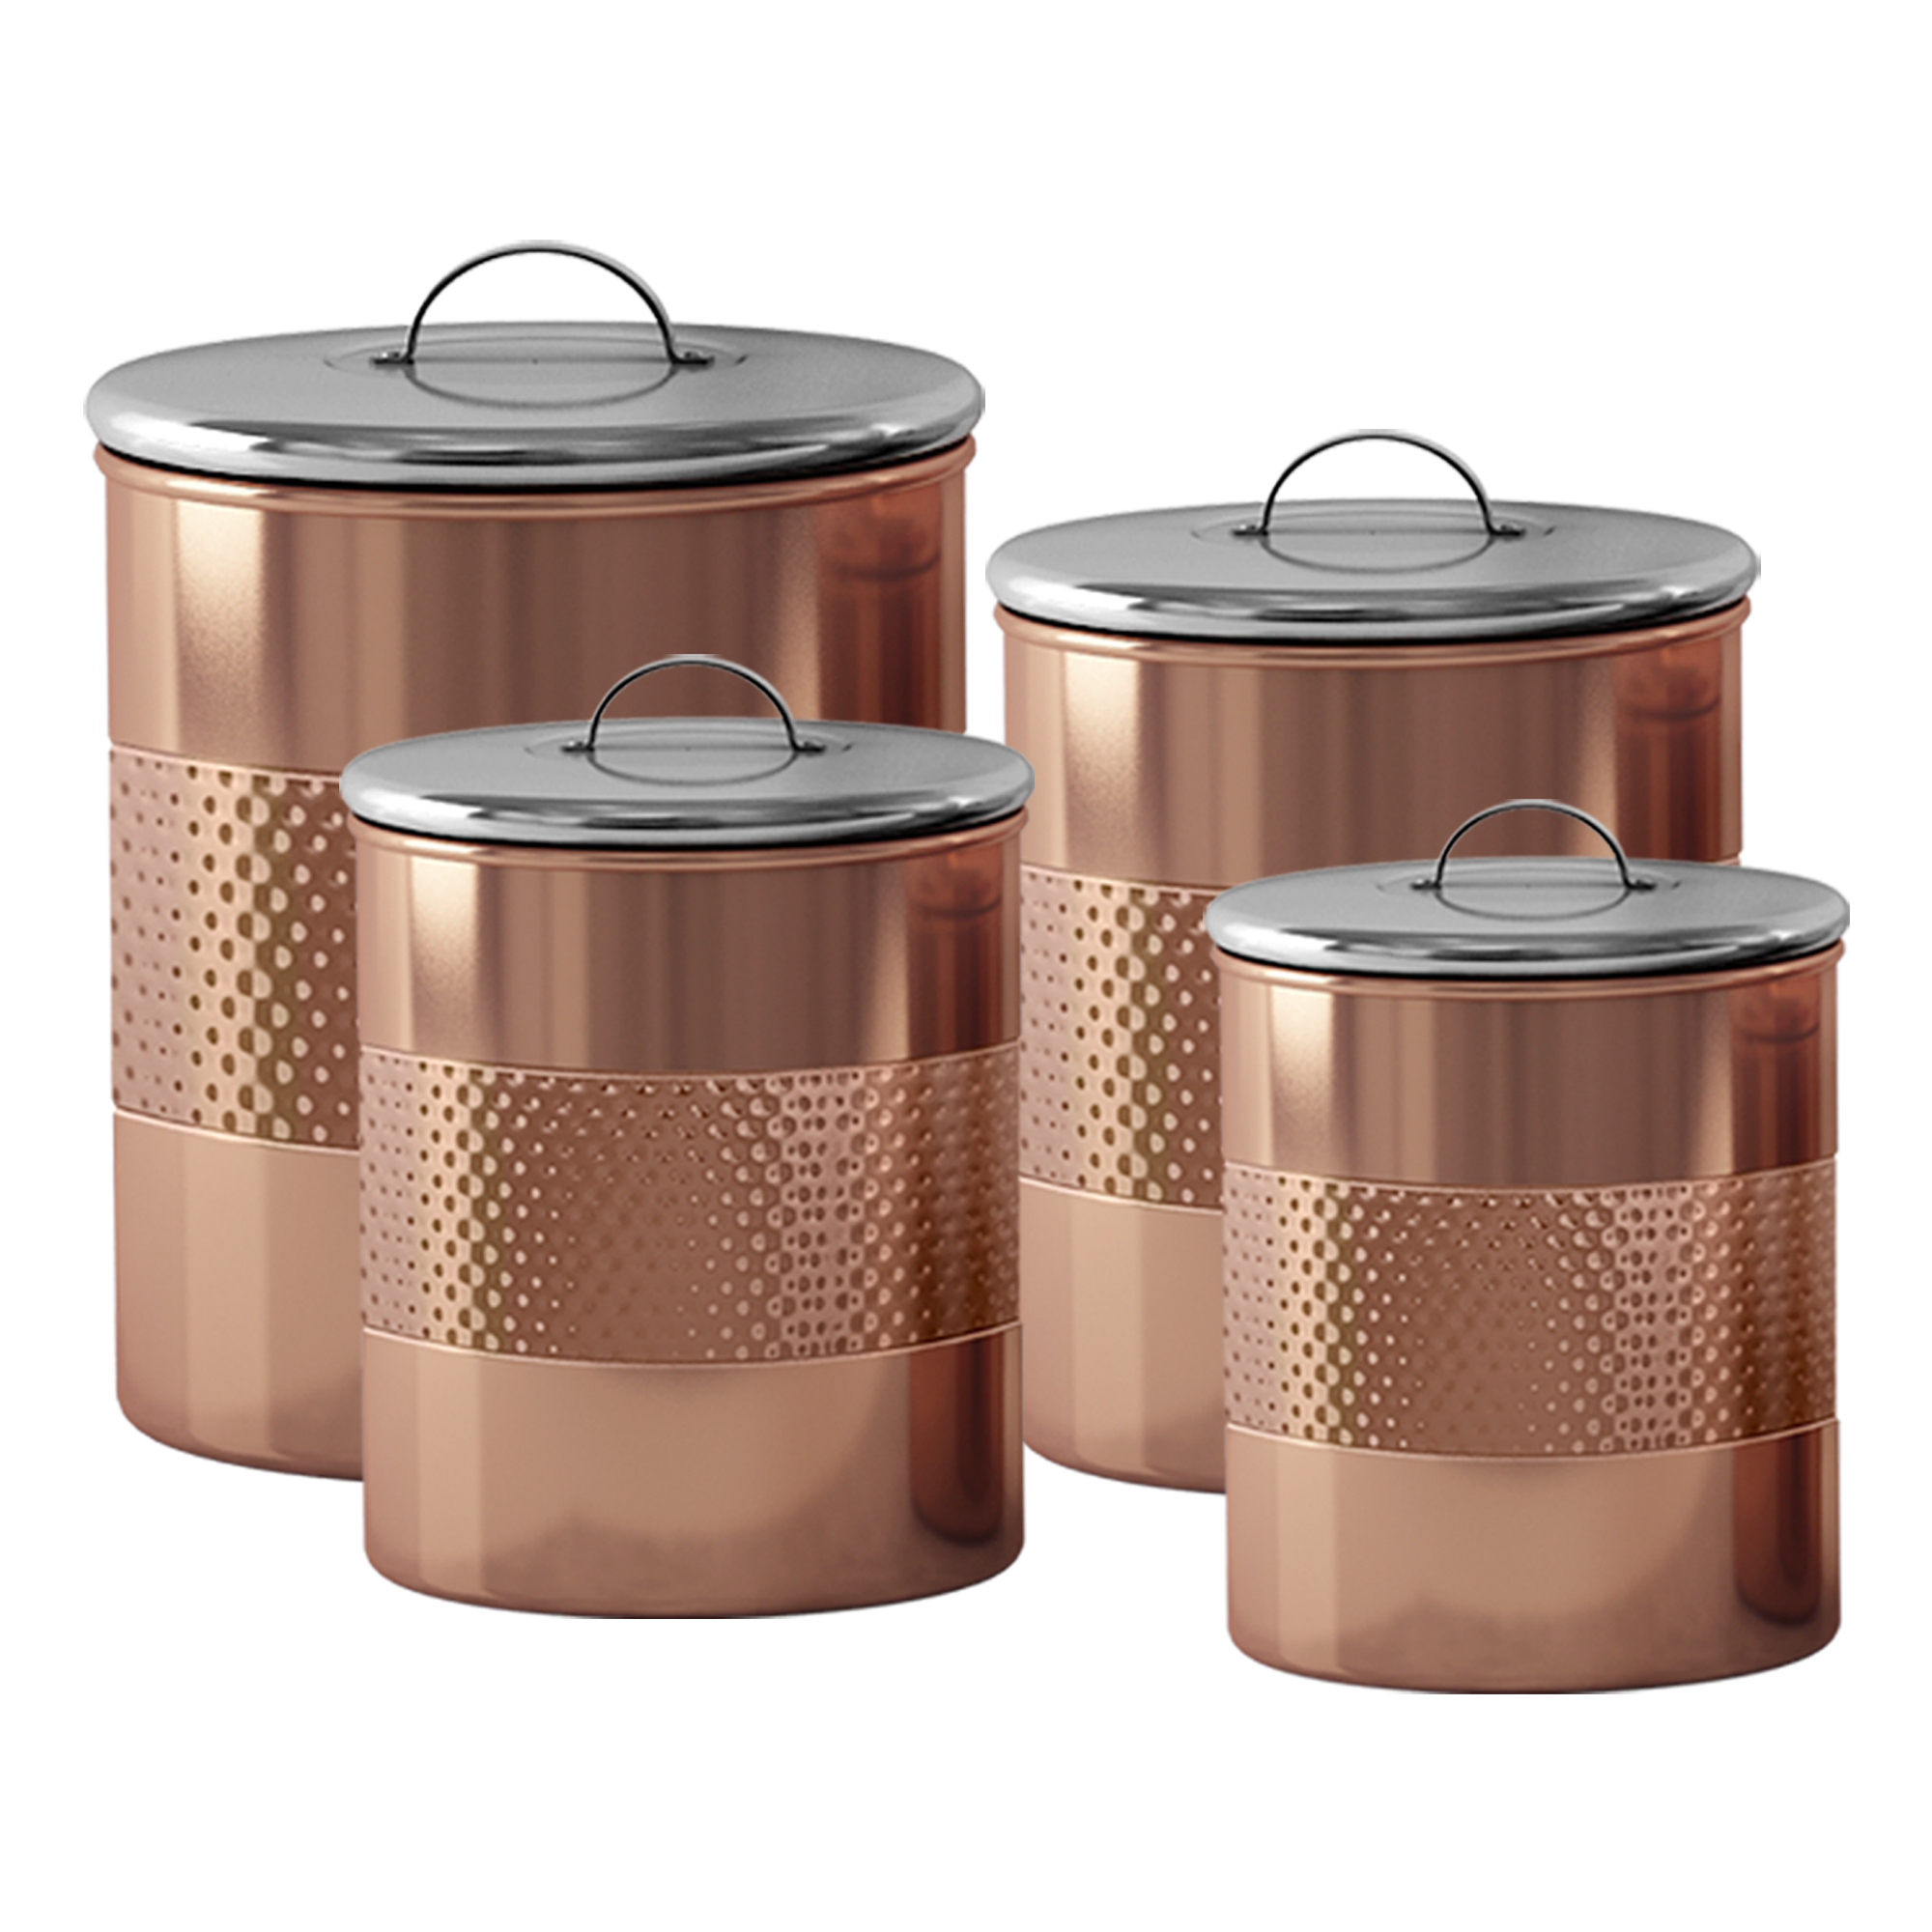 Tg-ch-04c-4 4 Qt. Hammered Canister Copper